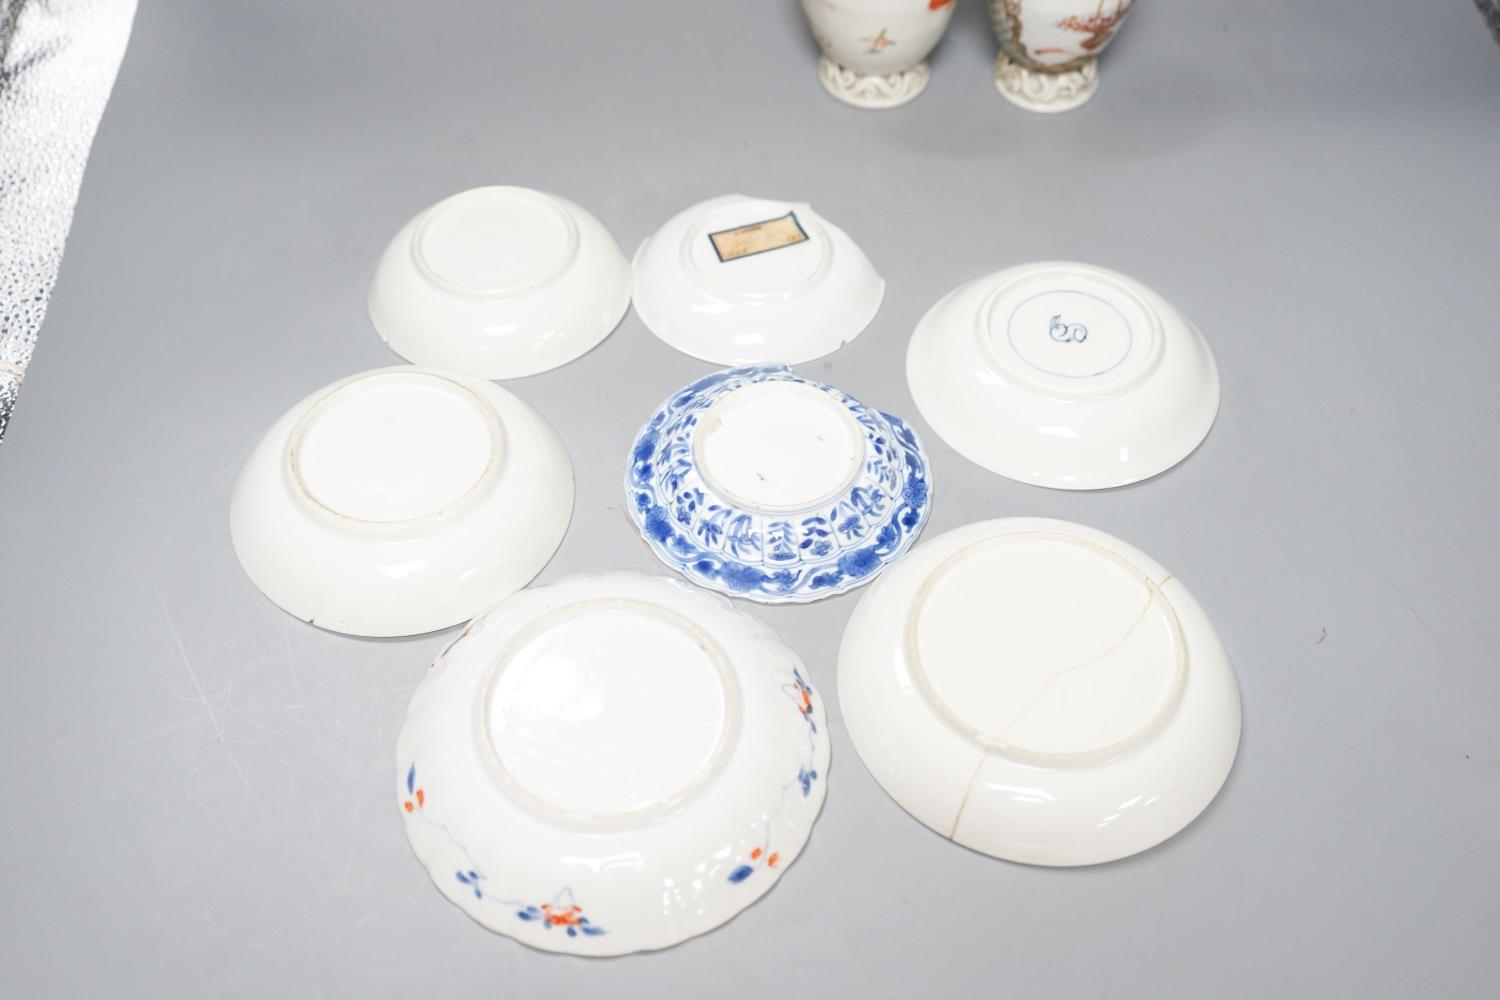 Assorted Chinese porcelain vases and tea wares, Qing dynasty or later - Image 7 of 7